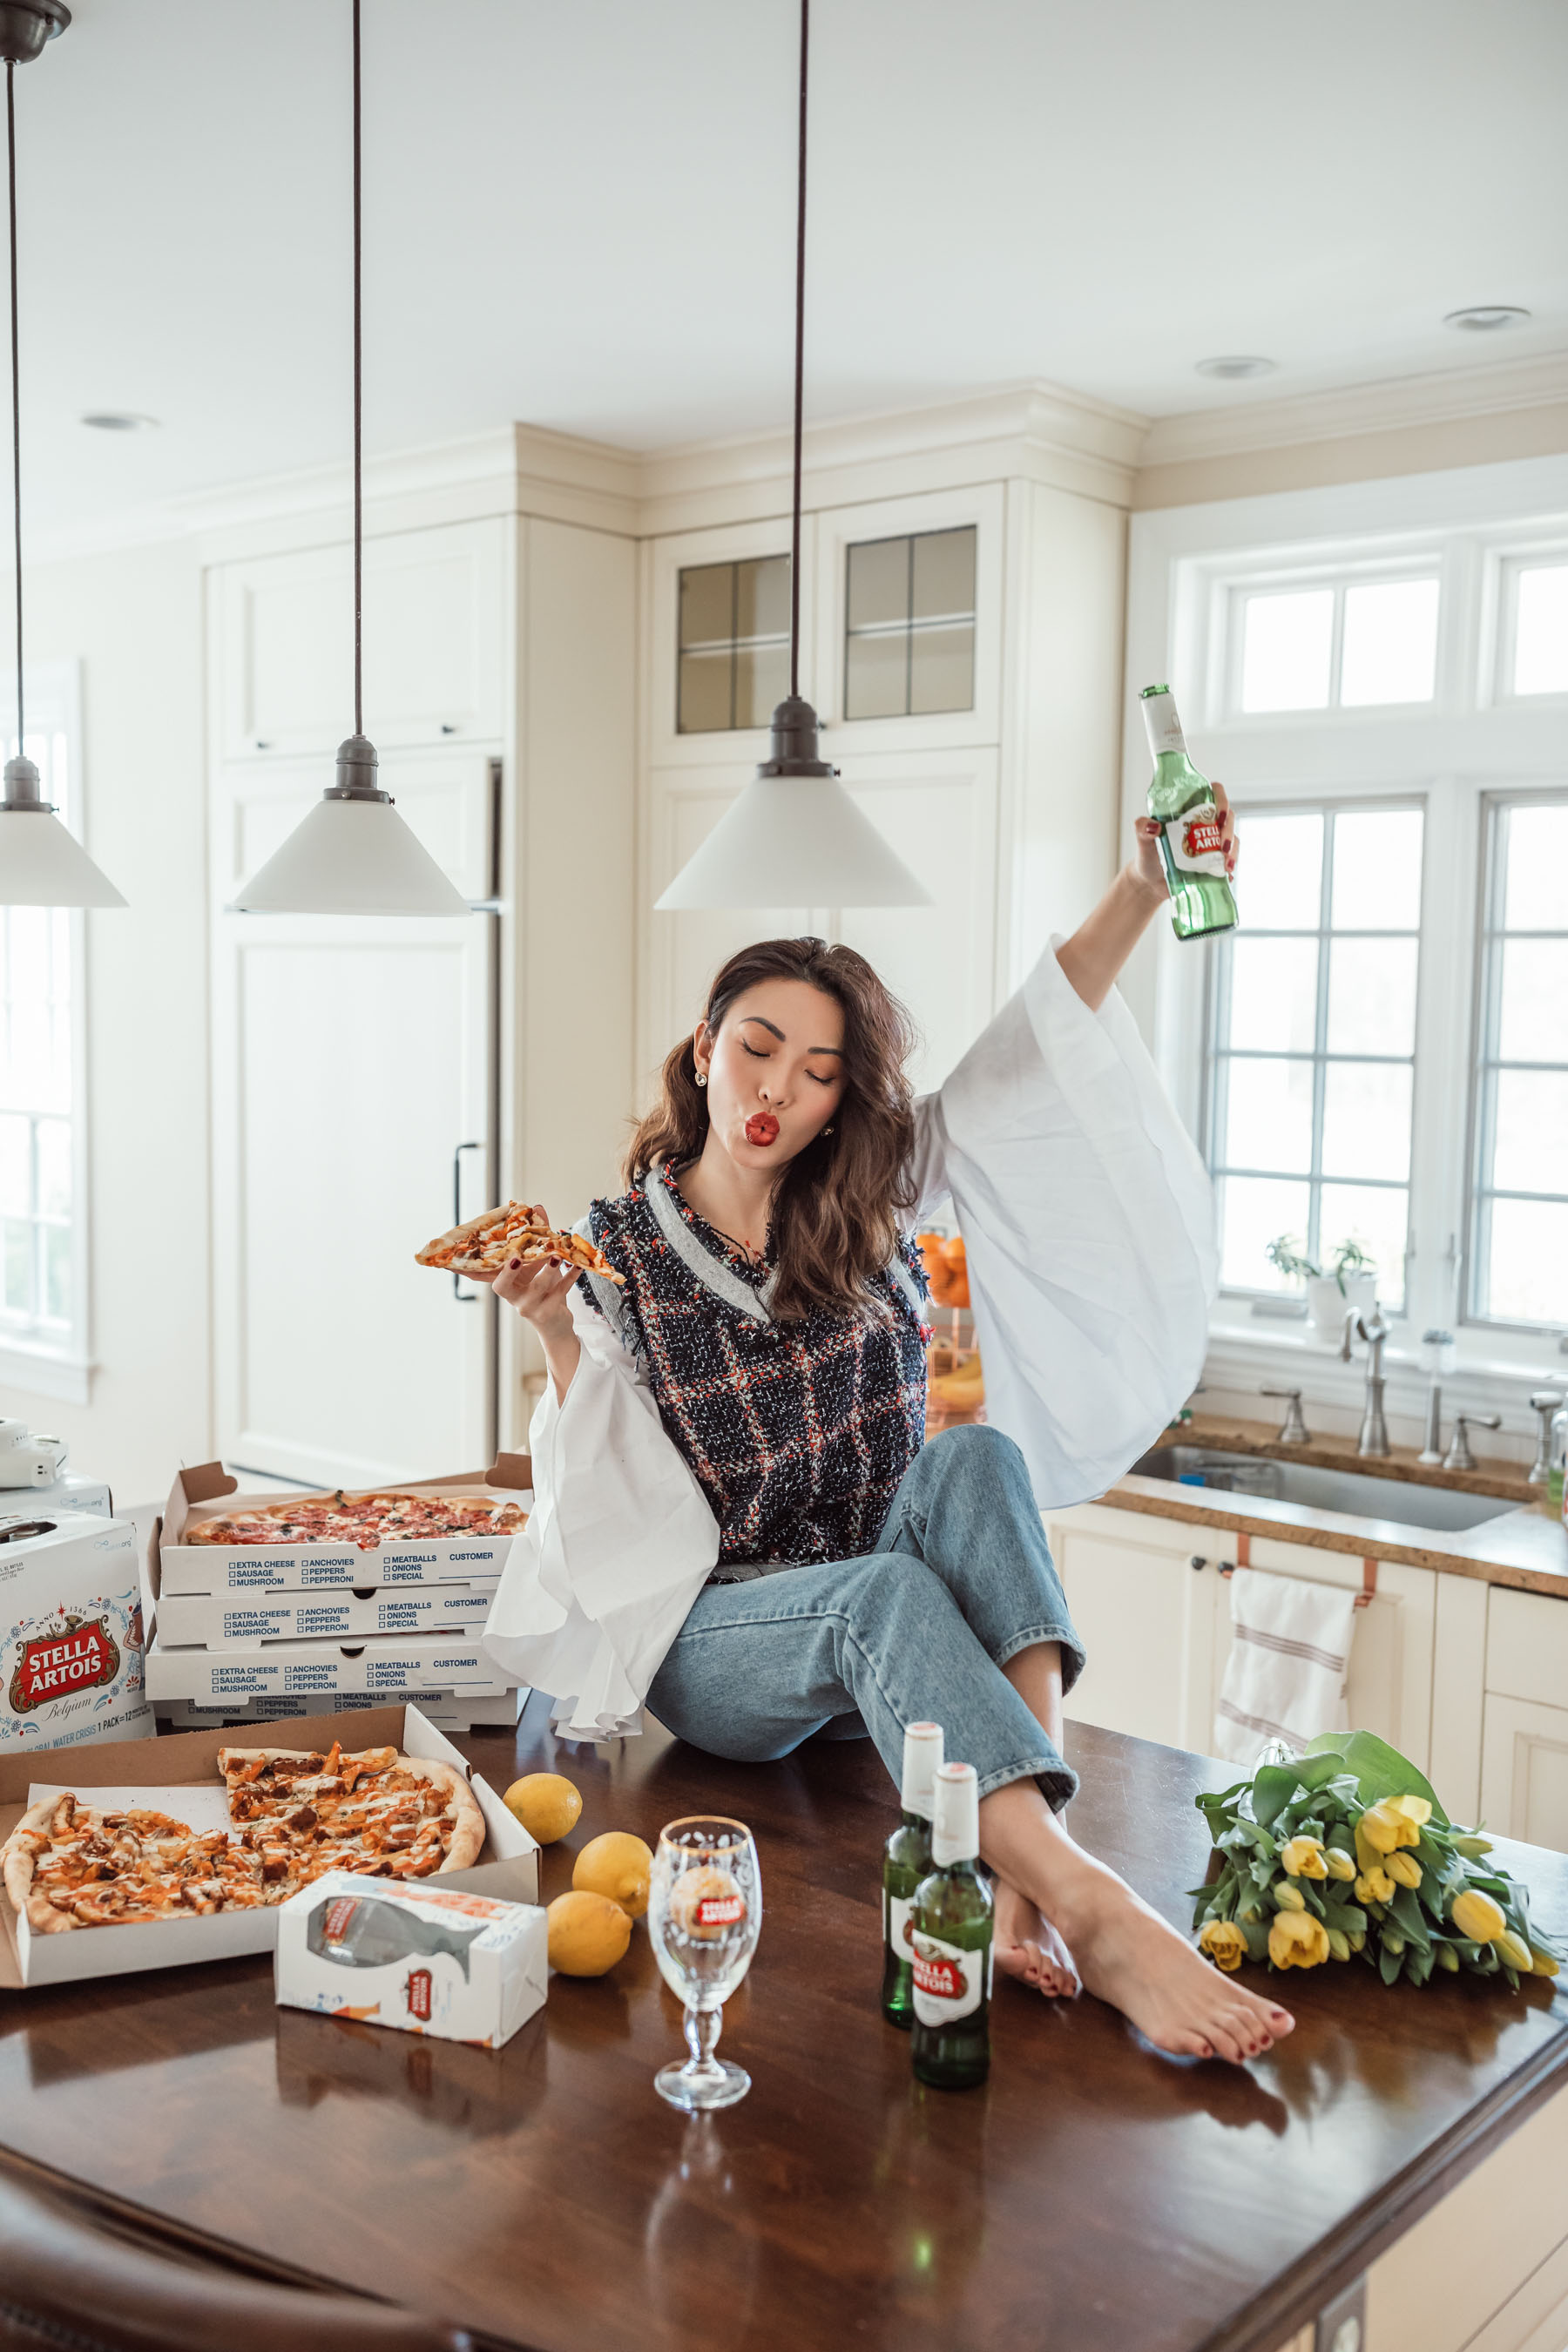 How to Throw a Super Bowl Party That Matters // Notjessfashion // Stella Artois, Super Bowl Party, fashion blogger, new york fashion blogger, jessica wang, pizza and bear